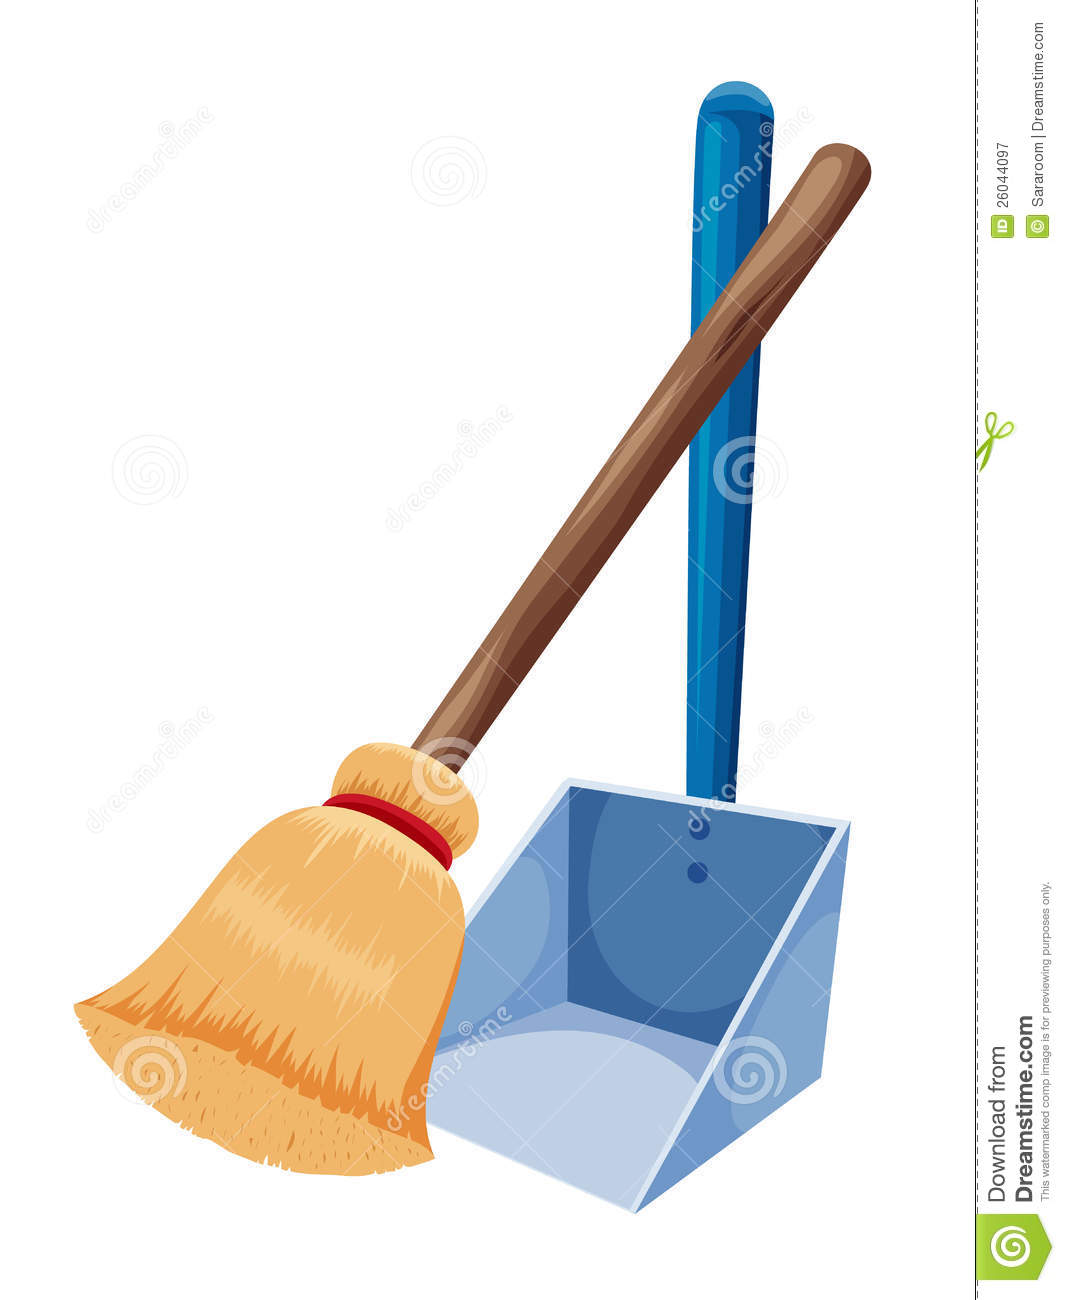 Broom And Dustpan Royalty Free Stock Photography   Image  26044097